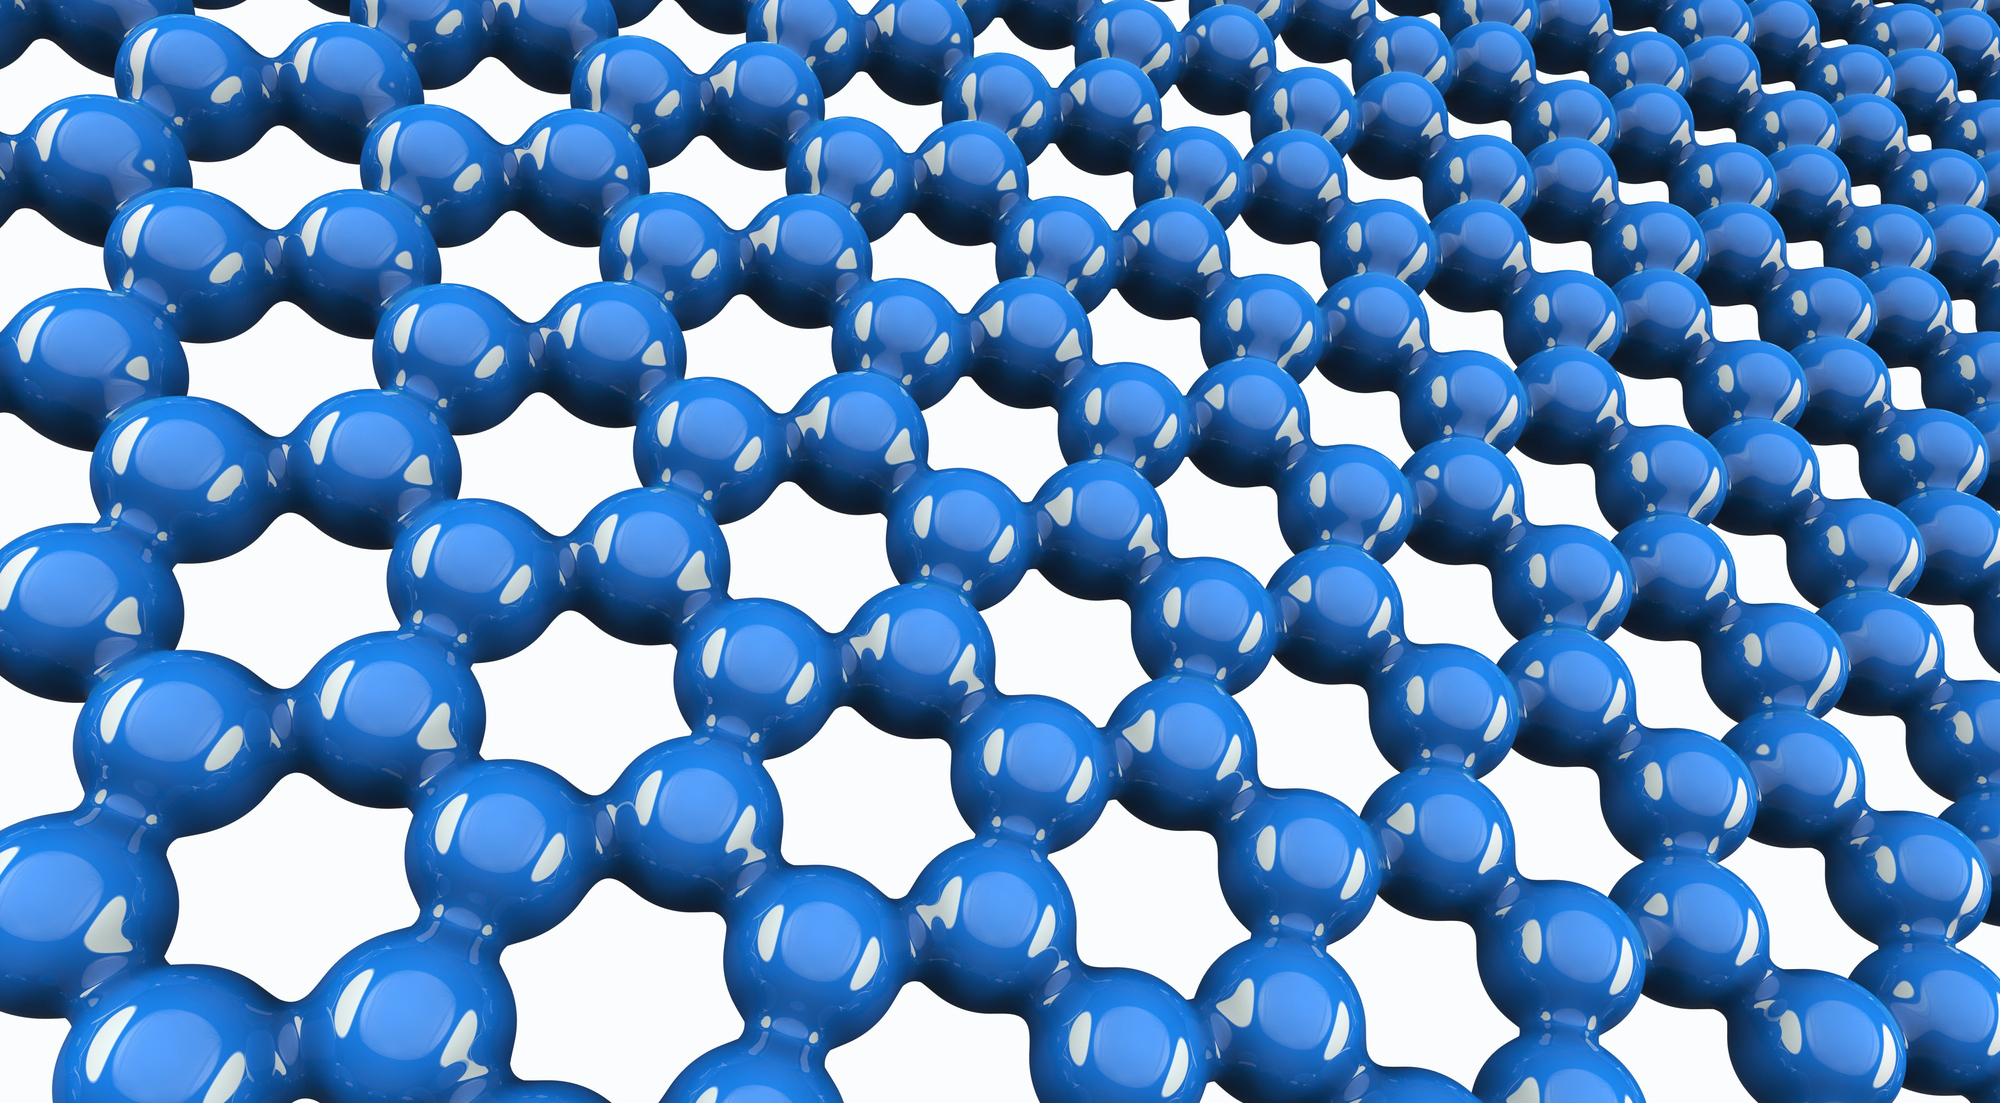 A transistor made using two atomically thin materials sets size record |  Ars Technica